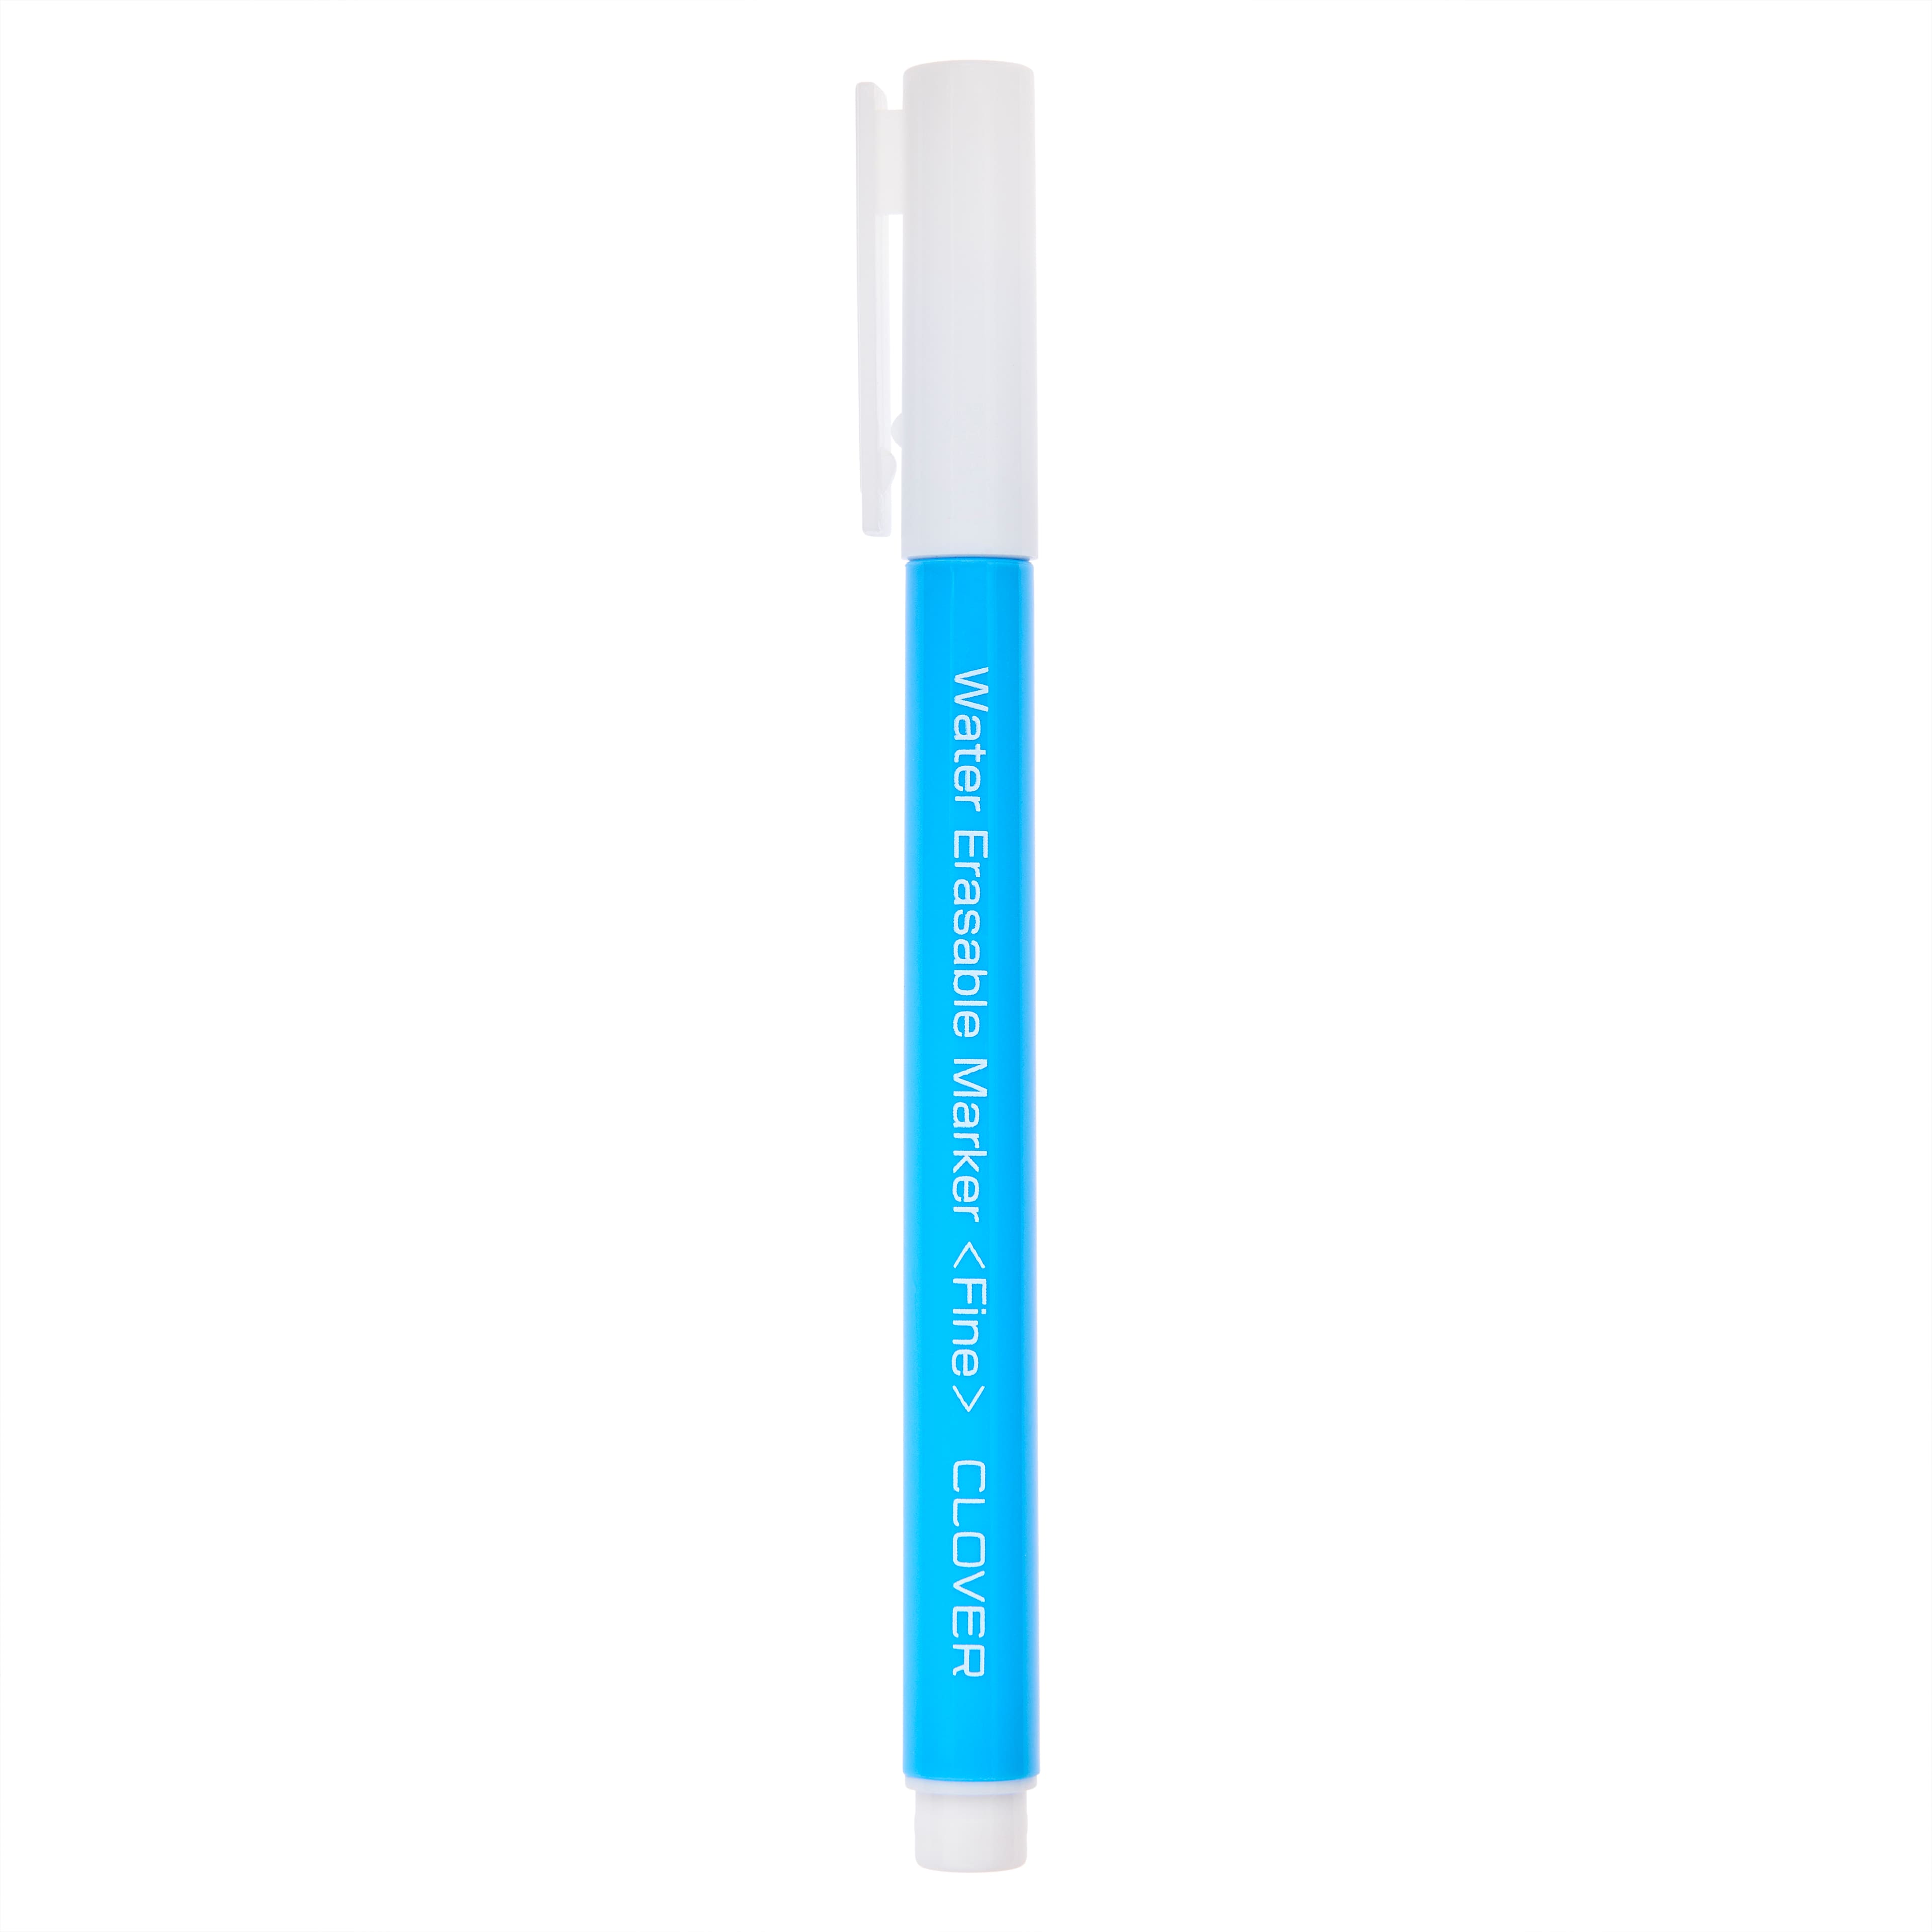 Clover Water Soluble Pencils - 3/Pack - Assorted Colors